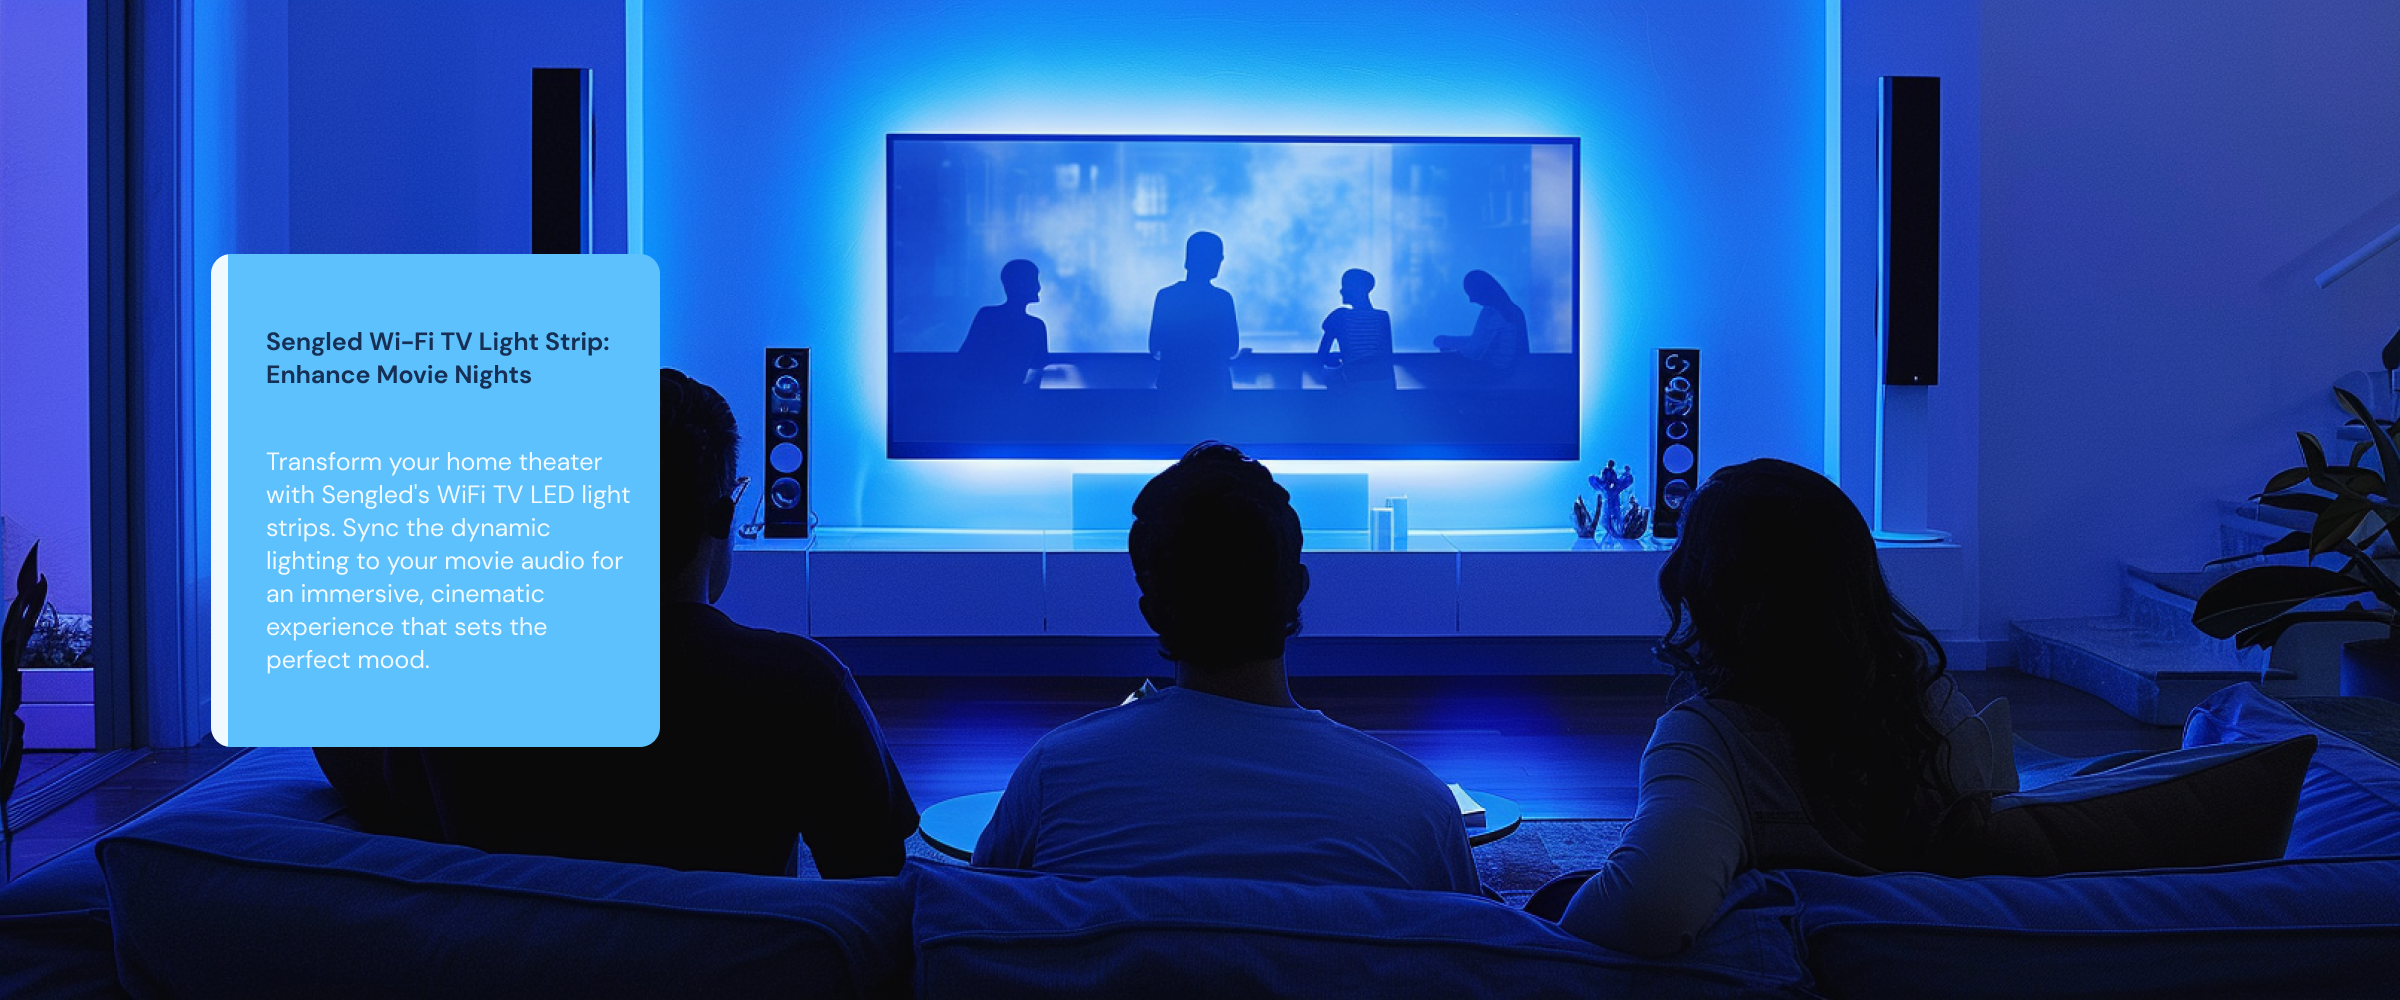 Enhance Movie Nights Transform your home theater with Sengled's WiFi TV LED light strips. Sync the dynamic lighting to your movie audio for an immersive, cinematic experience that sets the perfect mood.